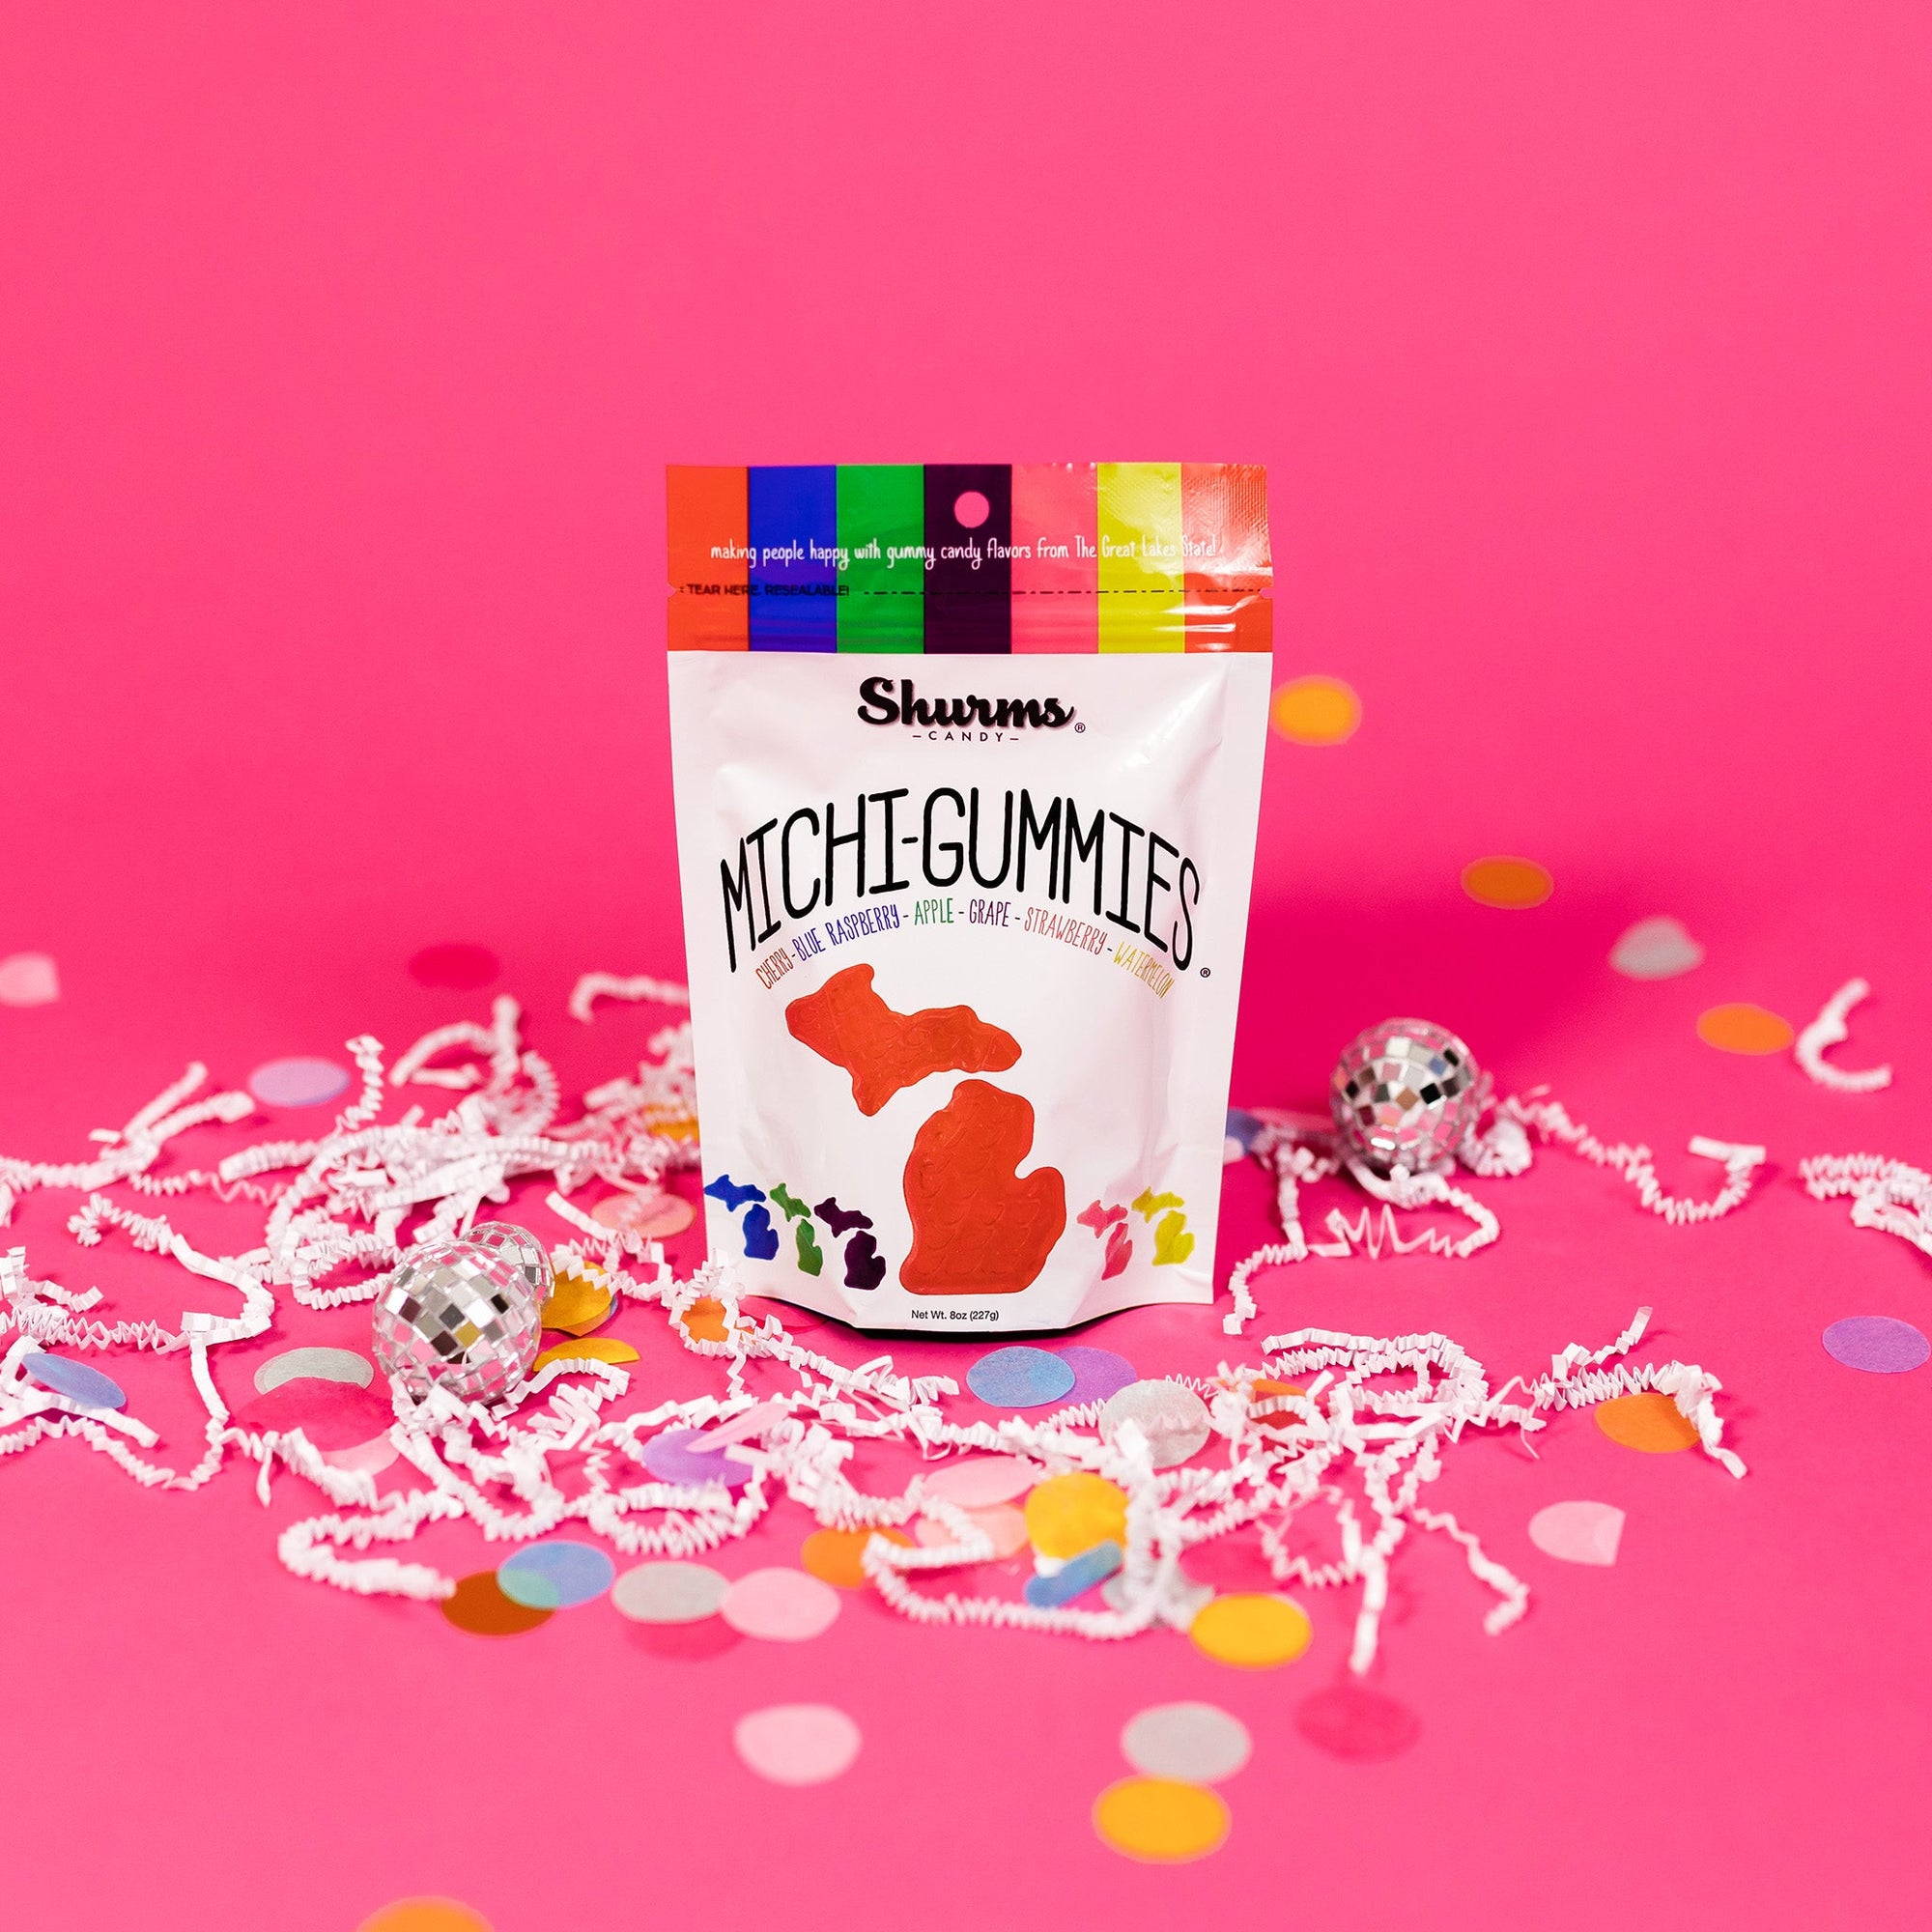 On a bubblegum pink background sits a bag with white crinkle and big, colorful confetti scattered around. There are mini disco balls. This package is colorful and says "making people happy with hummy candy flavors from The Great Lakes State!" in white, handwritten lettering. It also says "MICHI-GUMMIES," "CHERRY • BLUE RASPBERRY • APPLE • STRAWBERRY • WATERMELON" in all caps, various colors font. It has illustrations of colored gummies in the the shape of Michigan state. Net Wt. 8oz (227g)